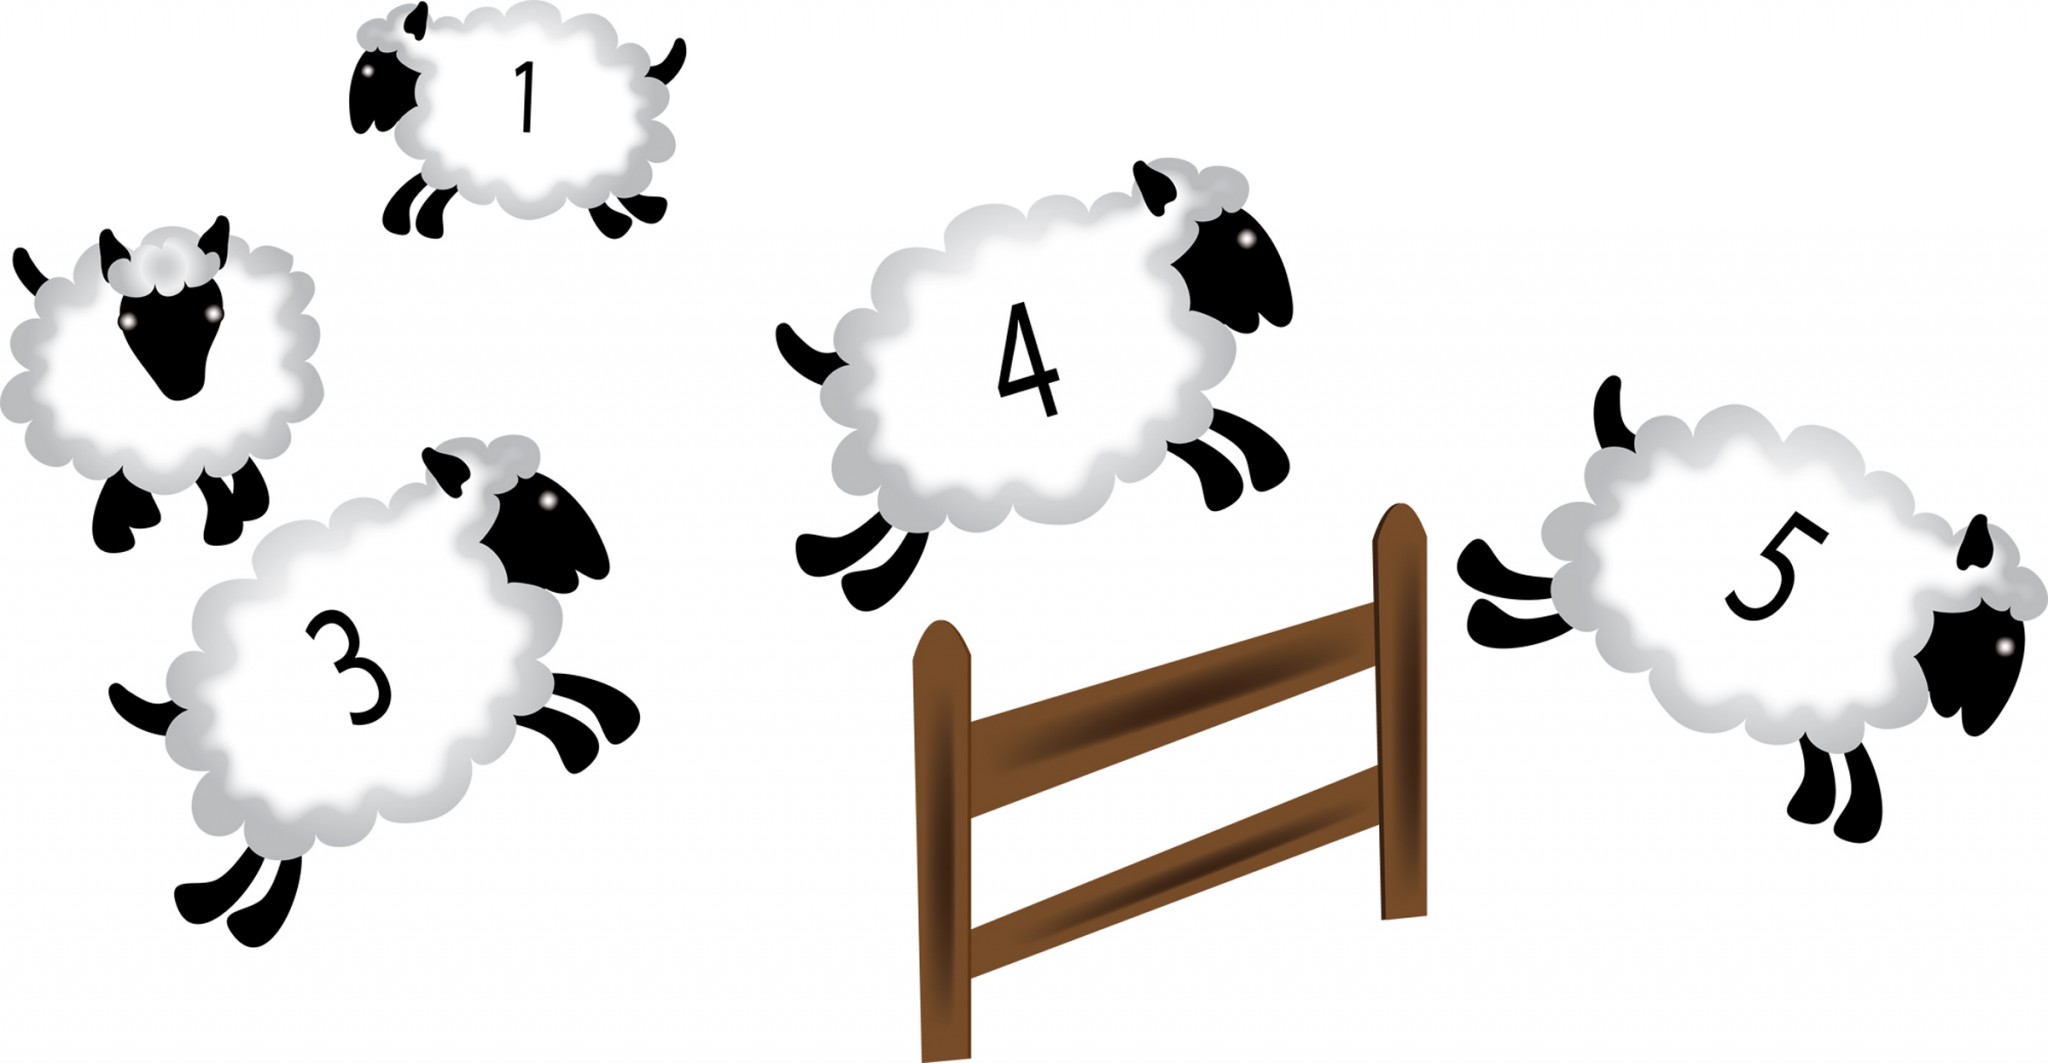 counting clipart black and white